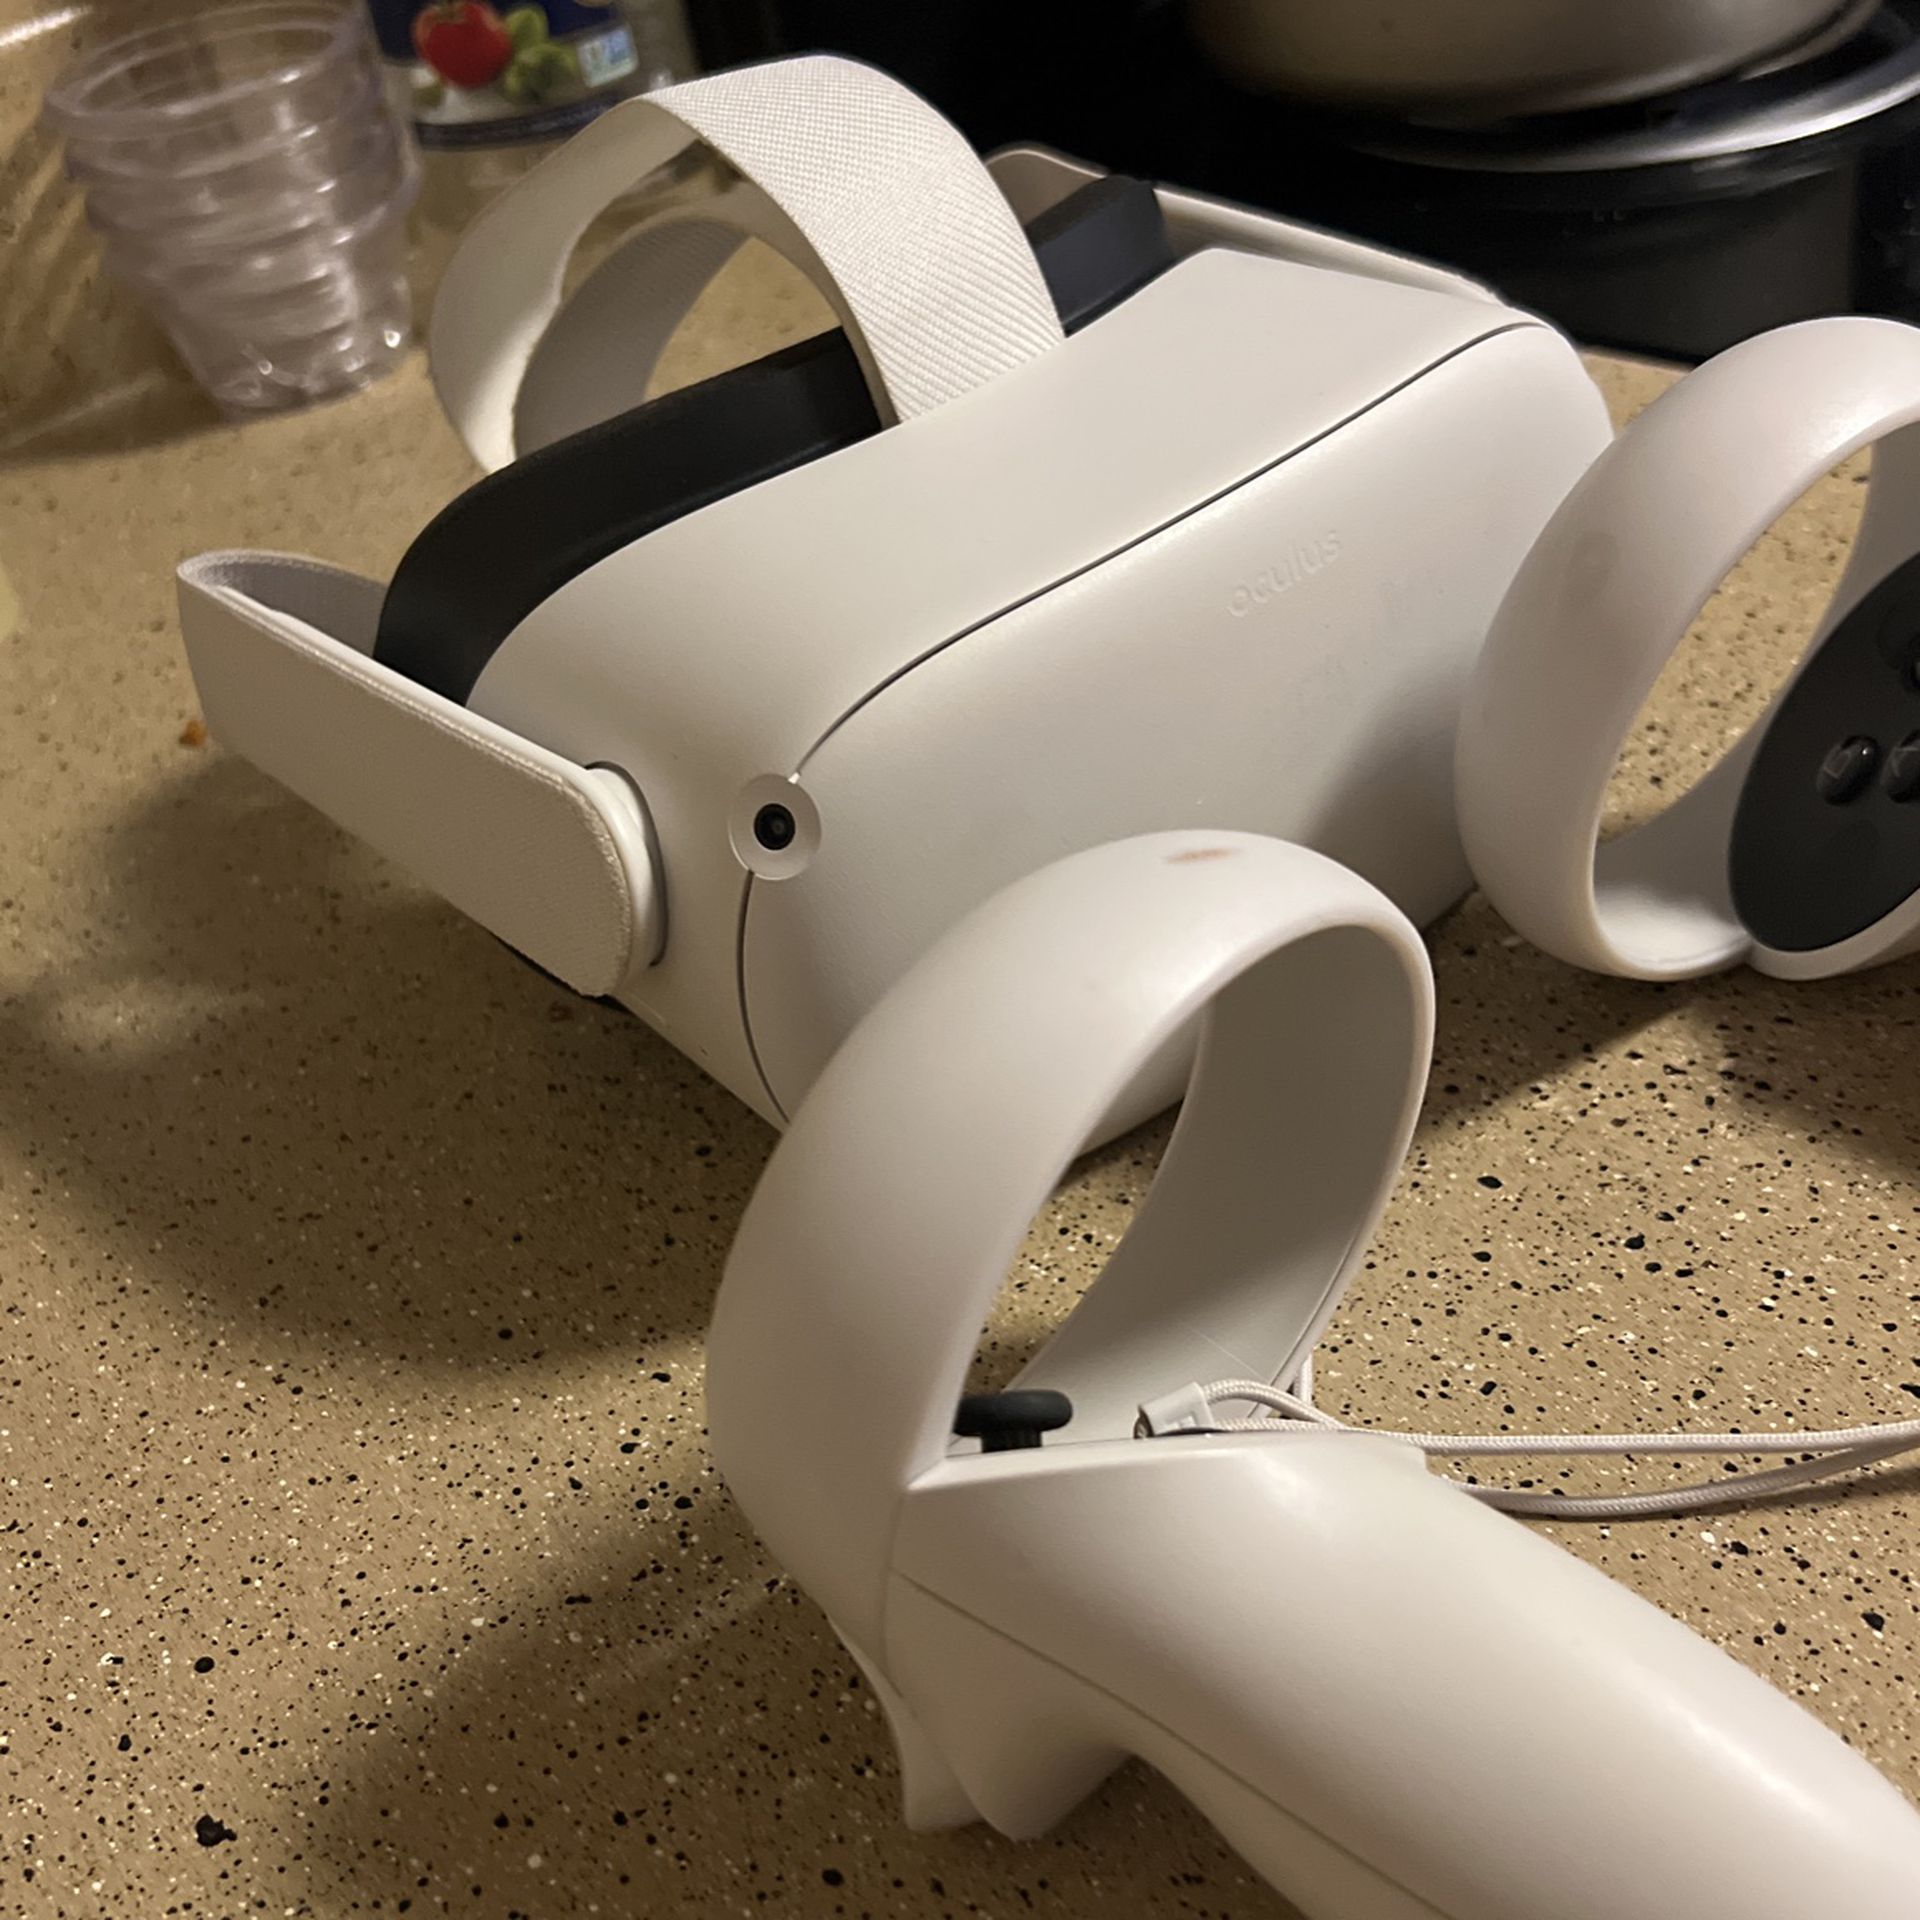 VR real feel fishing with headset for Sale in Simpsonville, SC - OfferUp